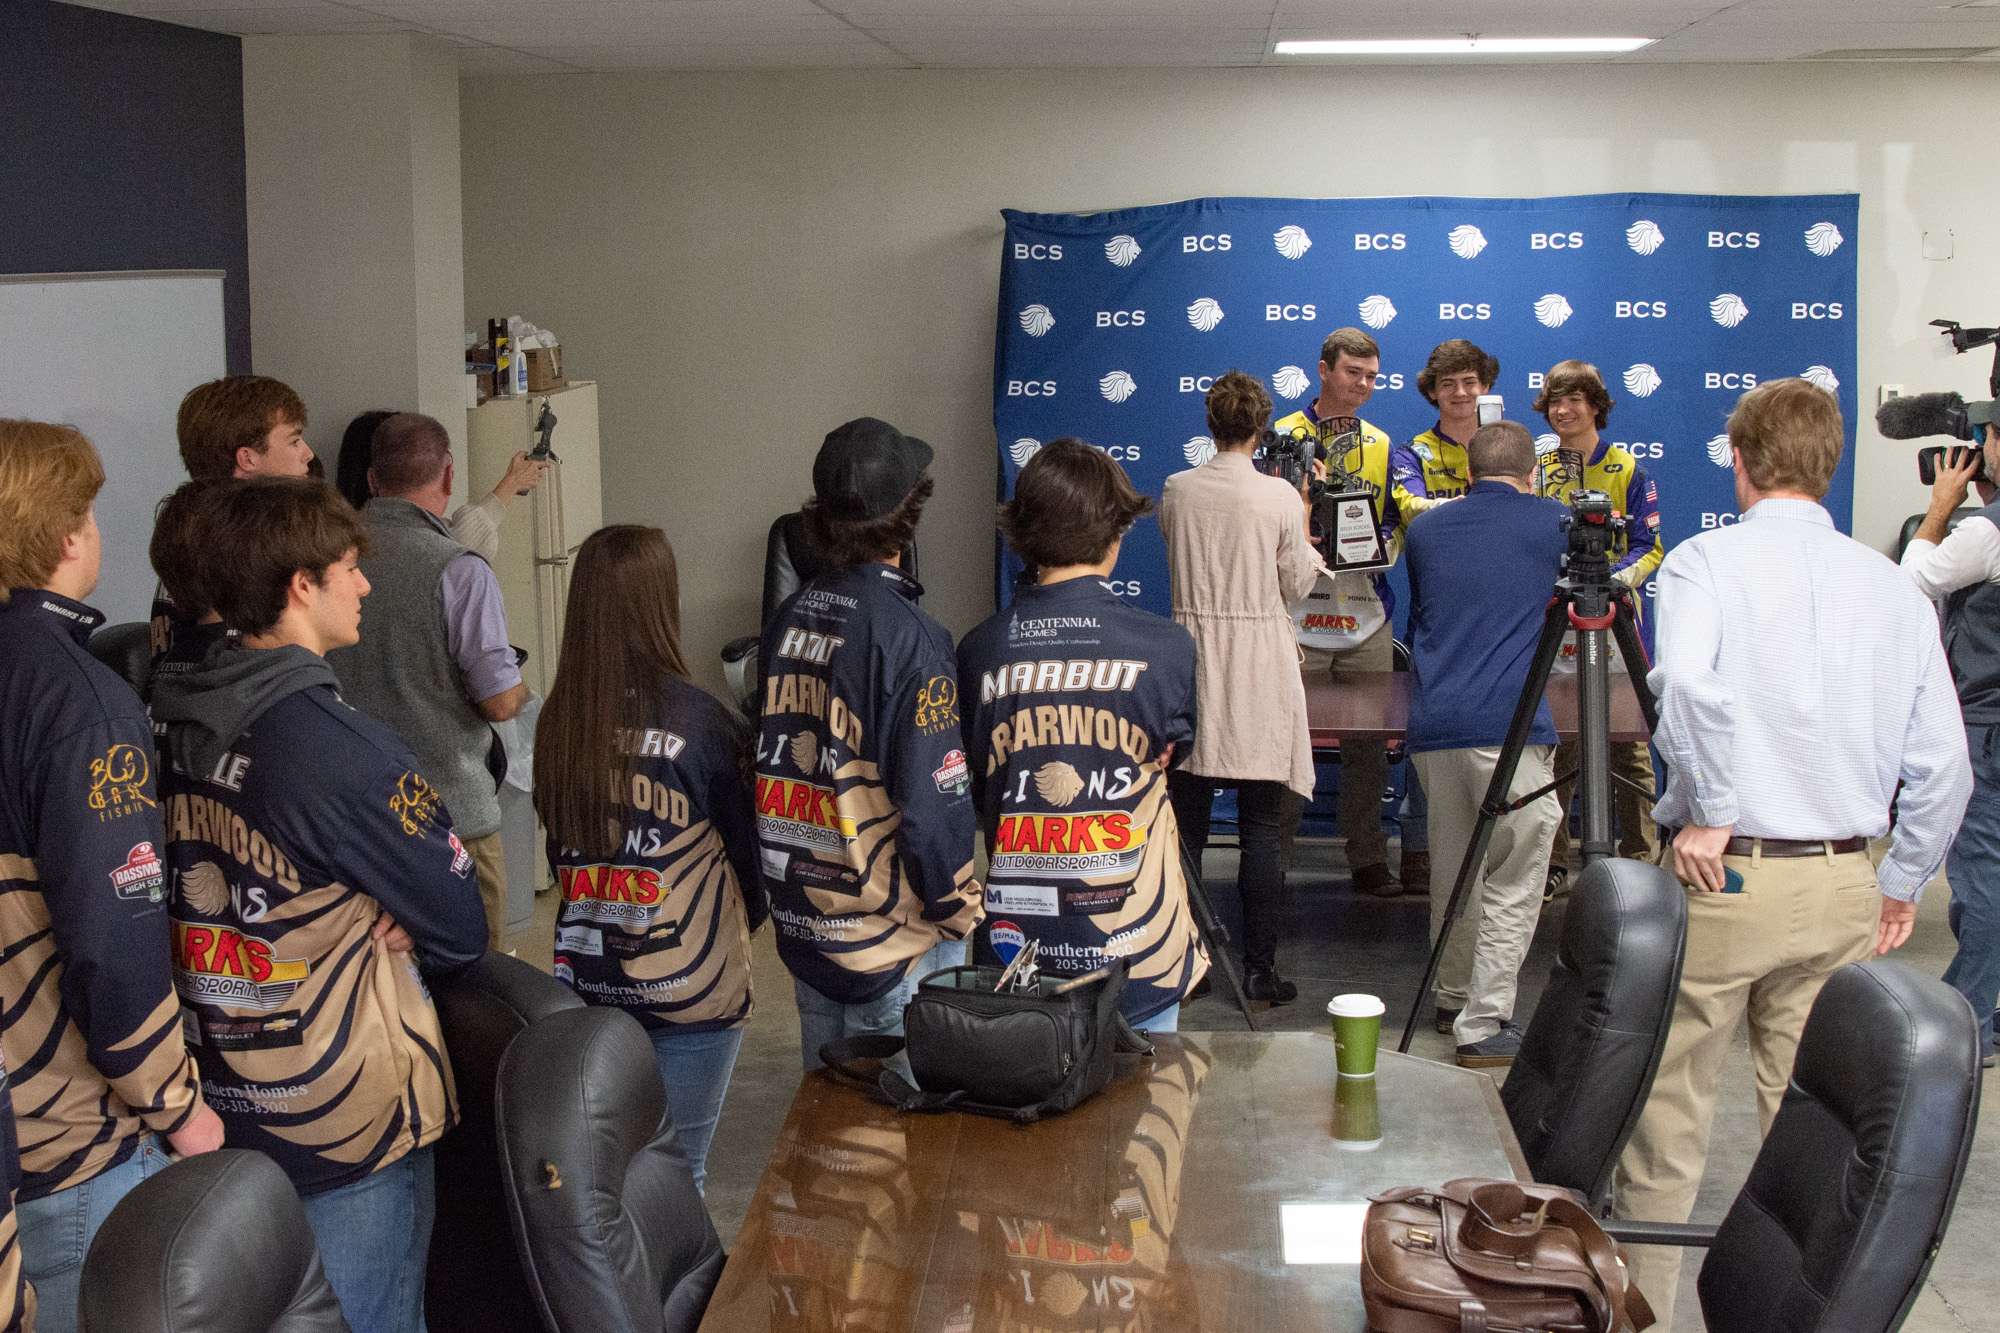 After the assembly, local media was on the scene to ask the team a few questions. 